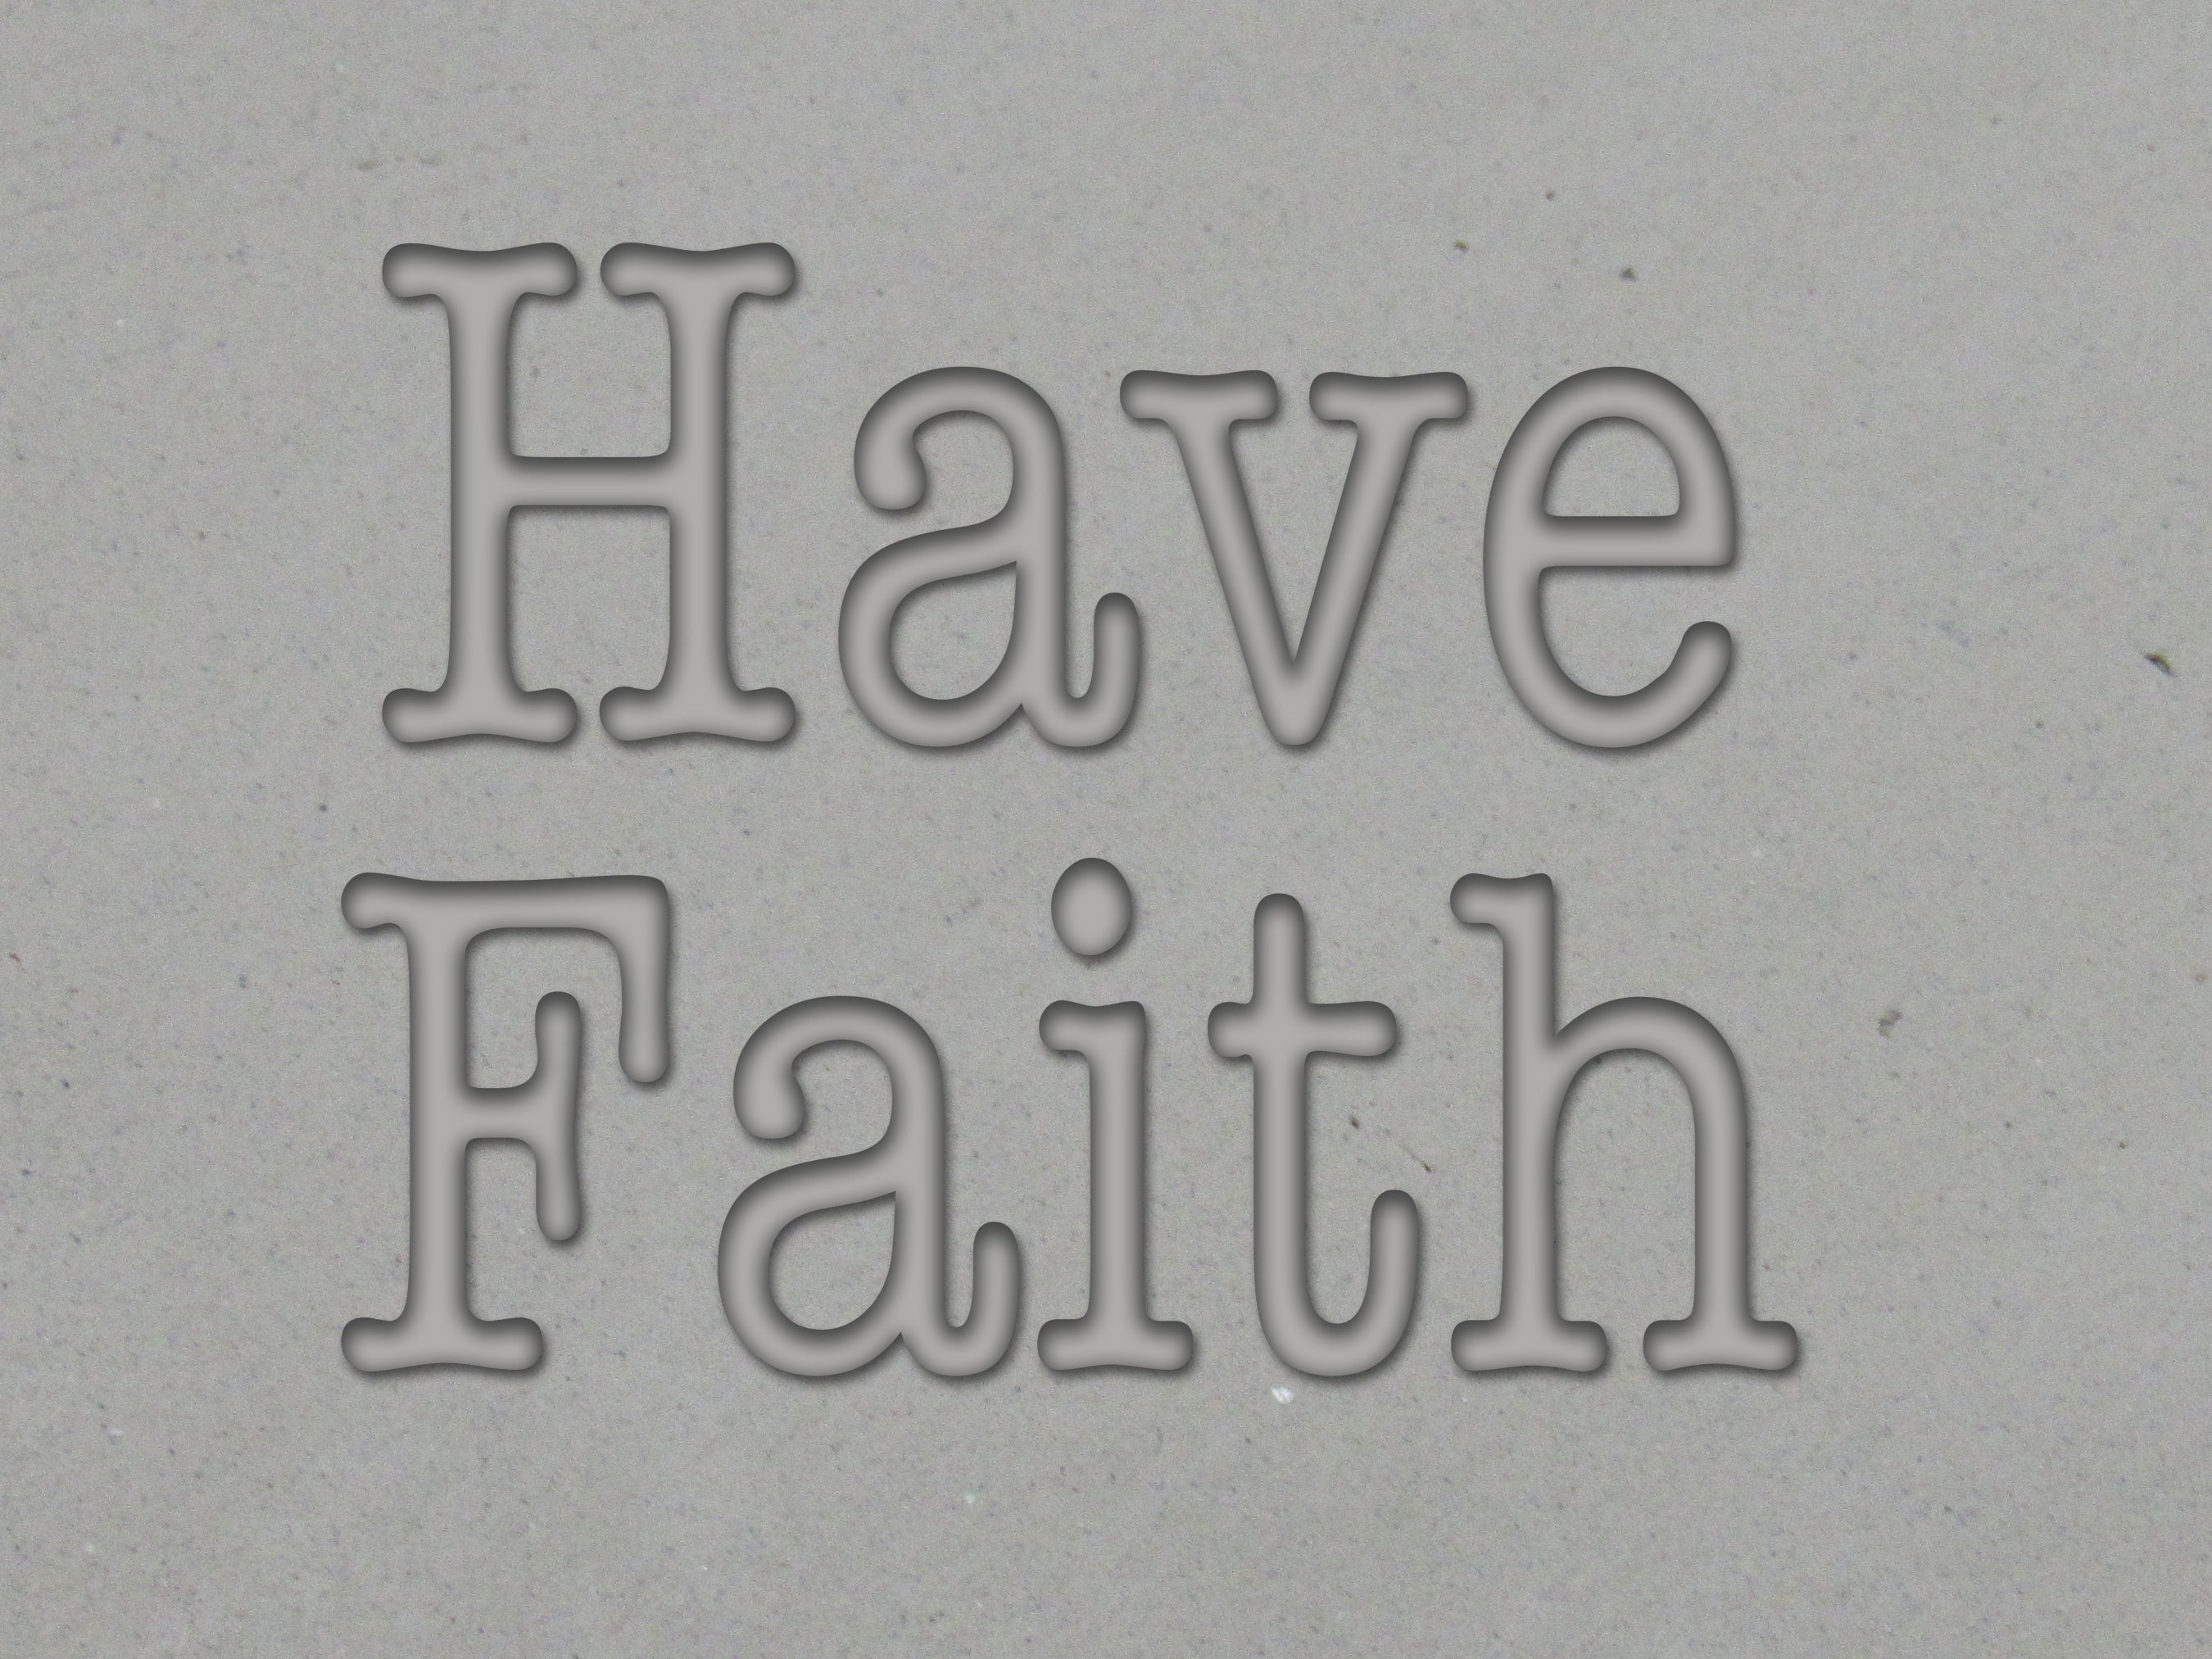 Inspirational "Have Faith" pottery stamp, Mug clay stamp for slab built pottery